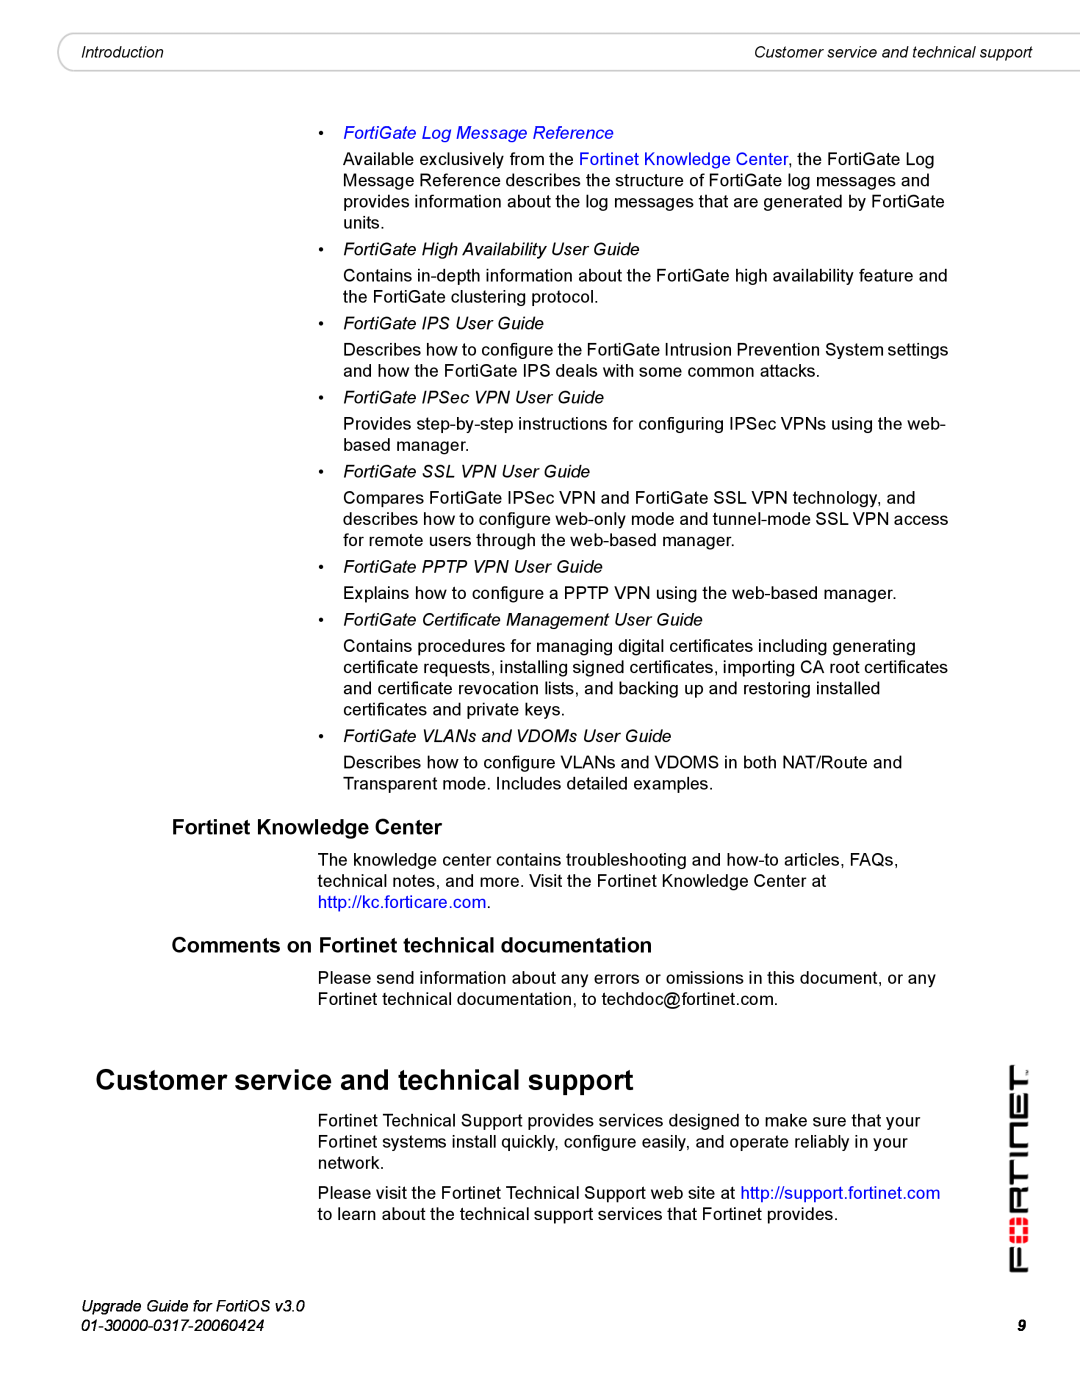 Fortinet FortiOS 3.0 manual Customer service and technical support, Fortinet Knowledge Center, FortiGate IPS User Guide 